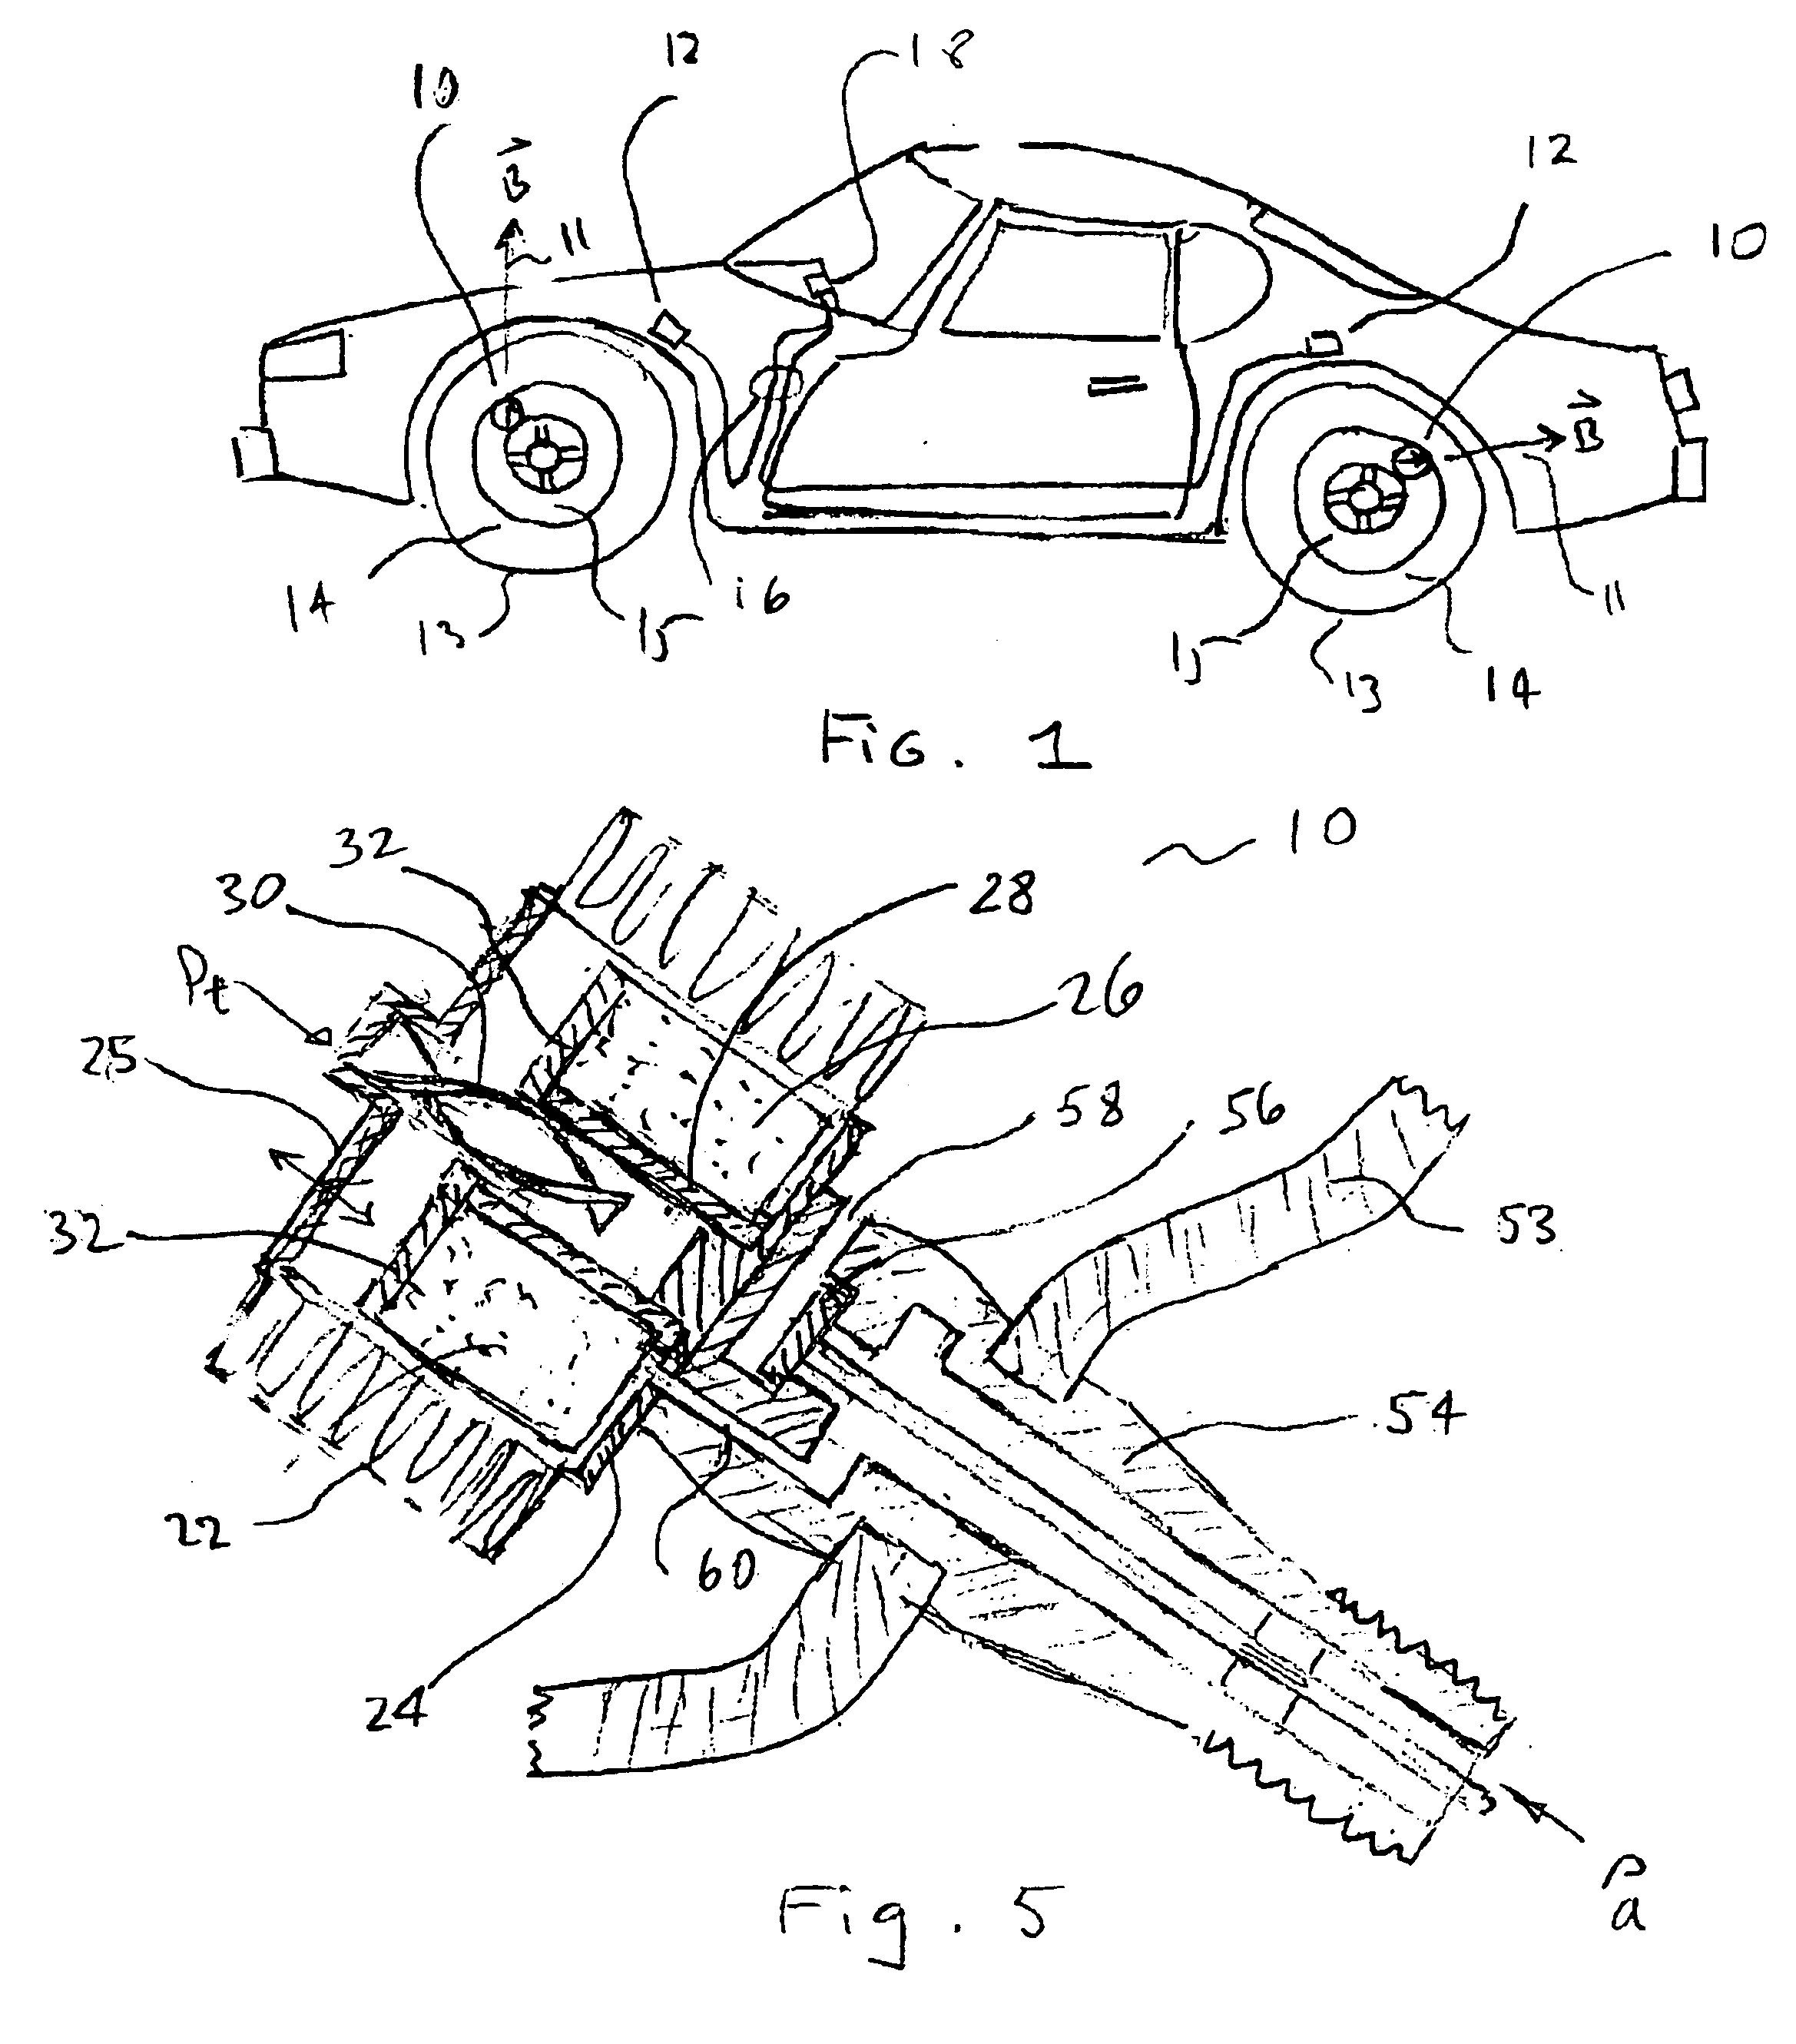 Magnetically coupled tire pressure sensing system